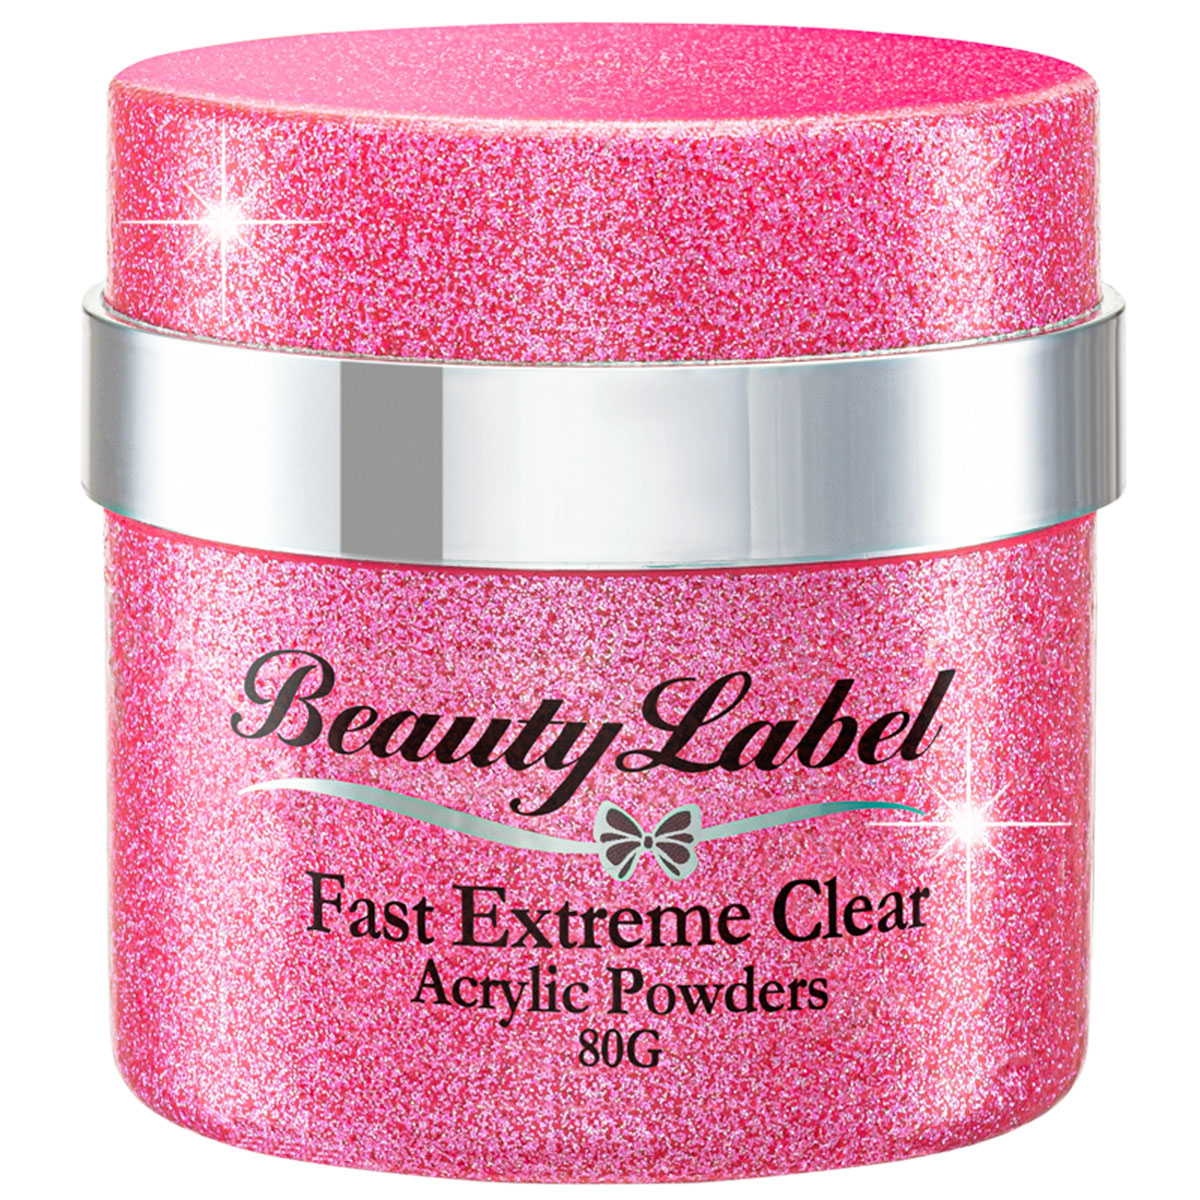 Beauty Label Acrylic Powder - Fast Extreme Clear 